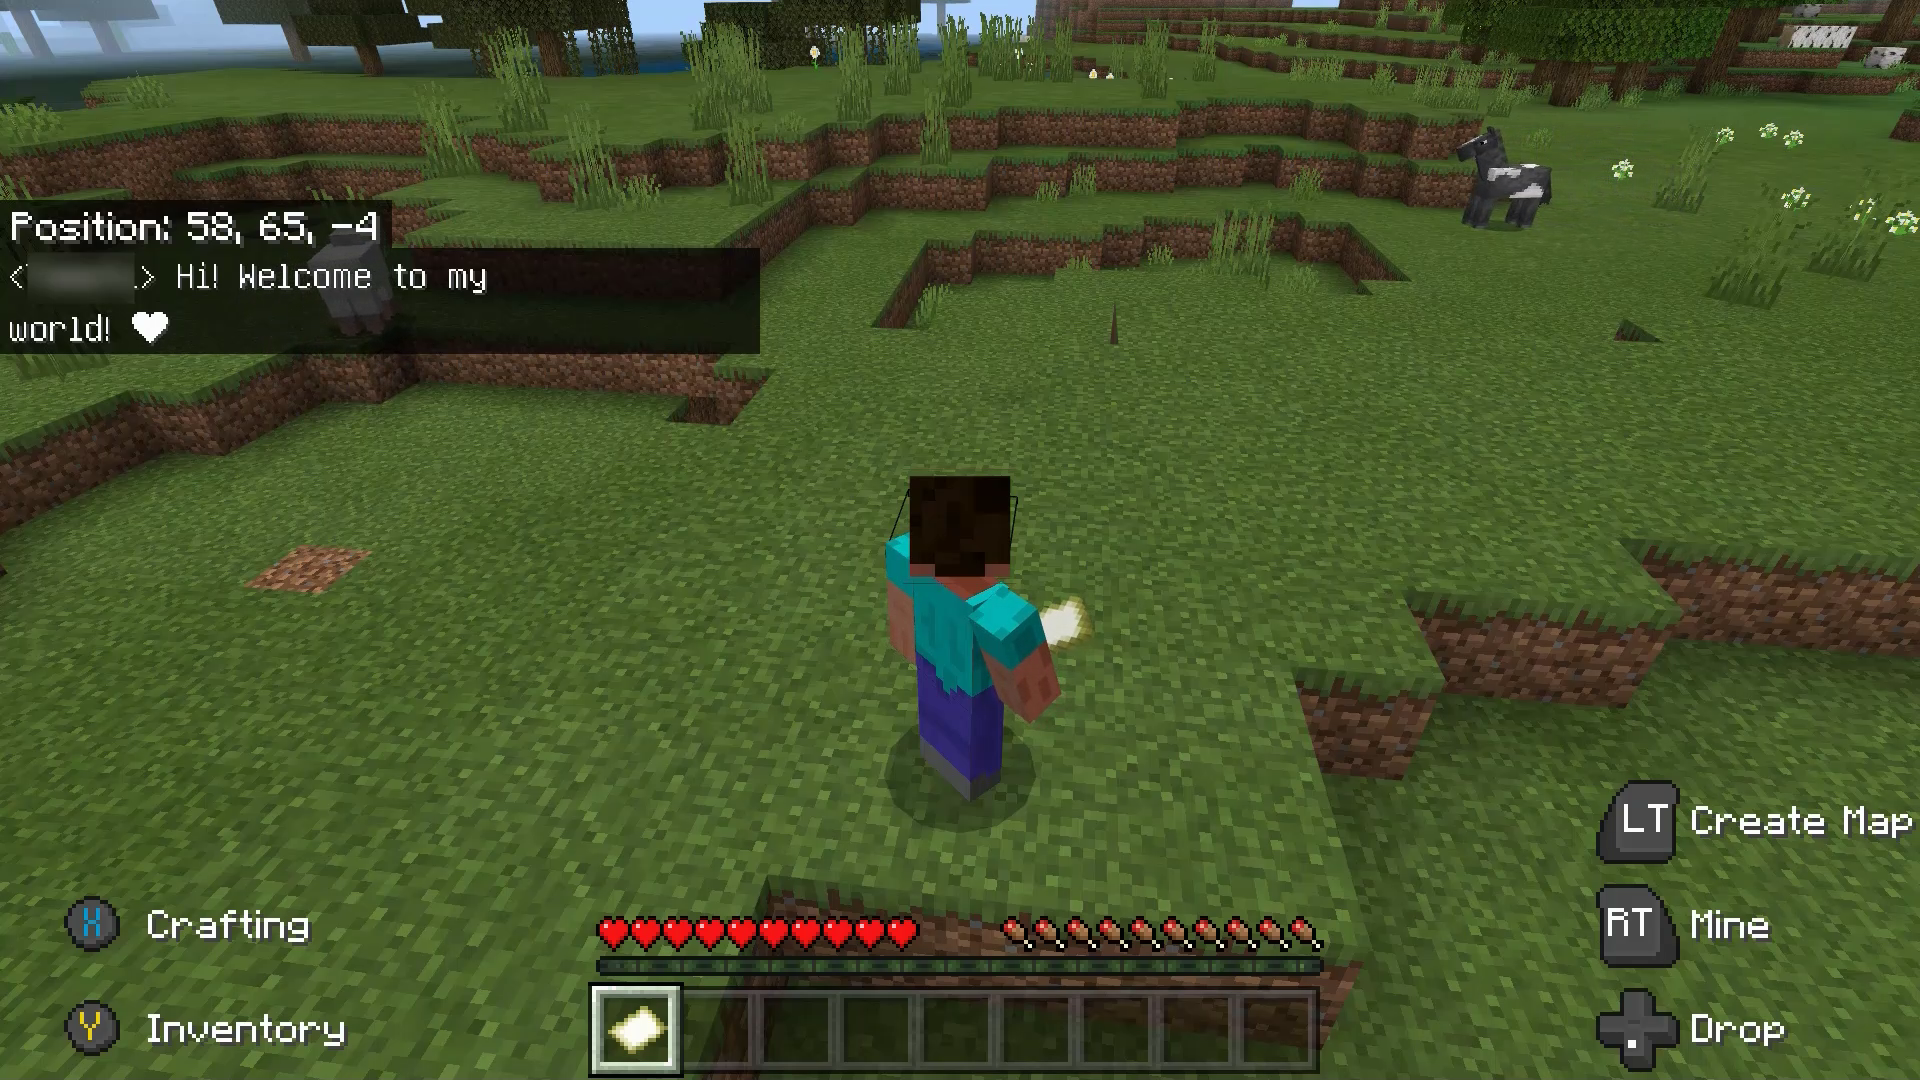 A screenshot from Minecraft Bedrock Edition that shows the character "Steve" in the world with multiplayer text chat appearing on the left of the screen that reads, "Hi! Welcome to my world!"